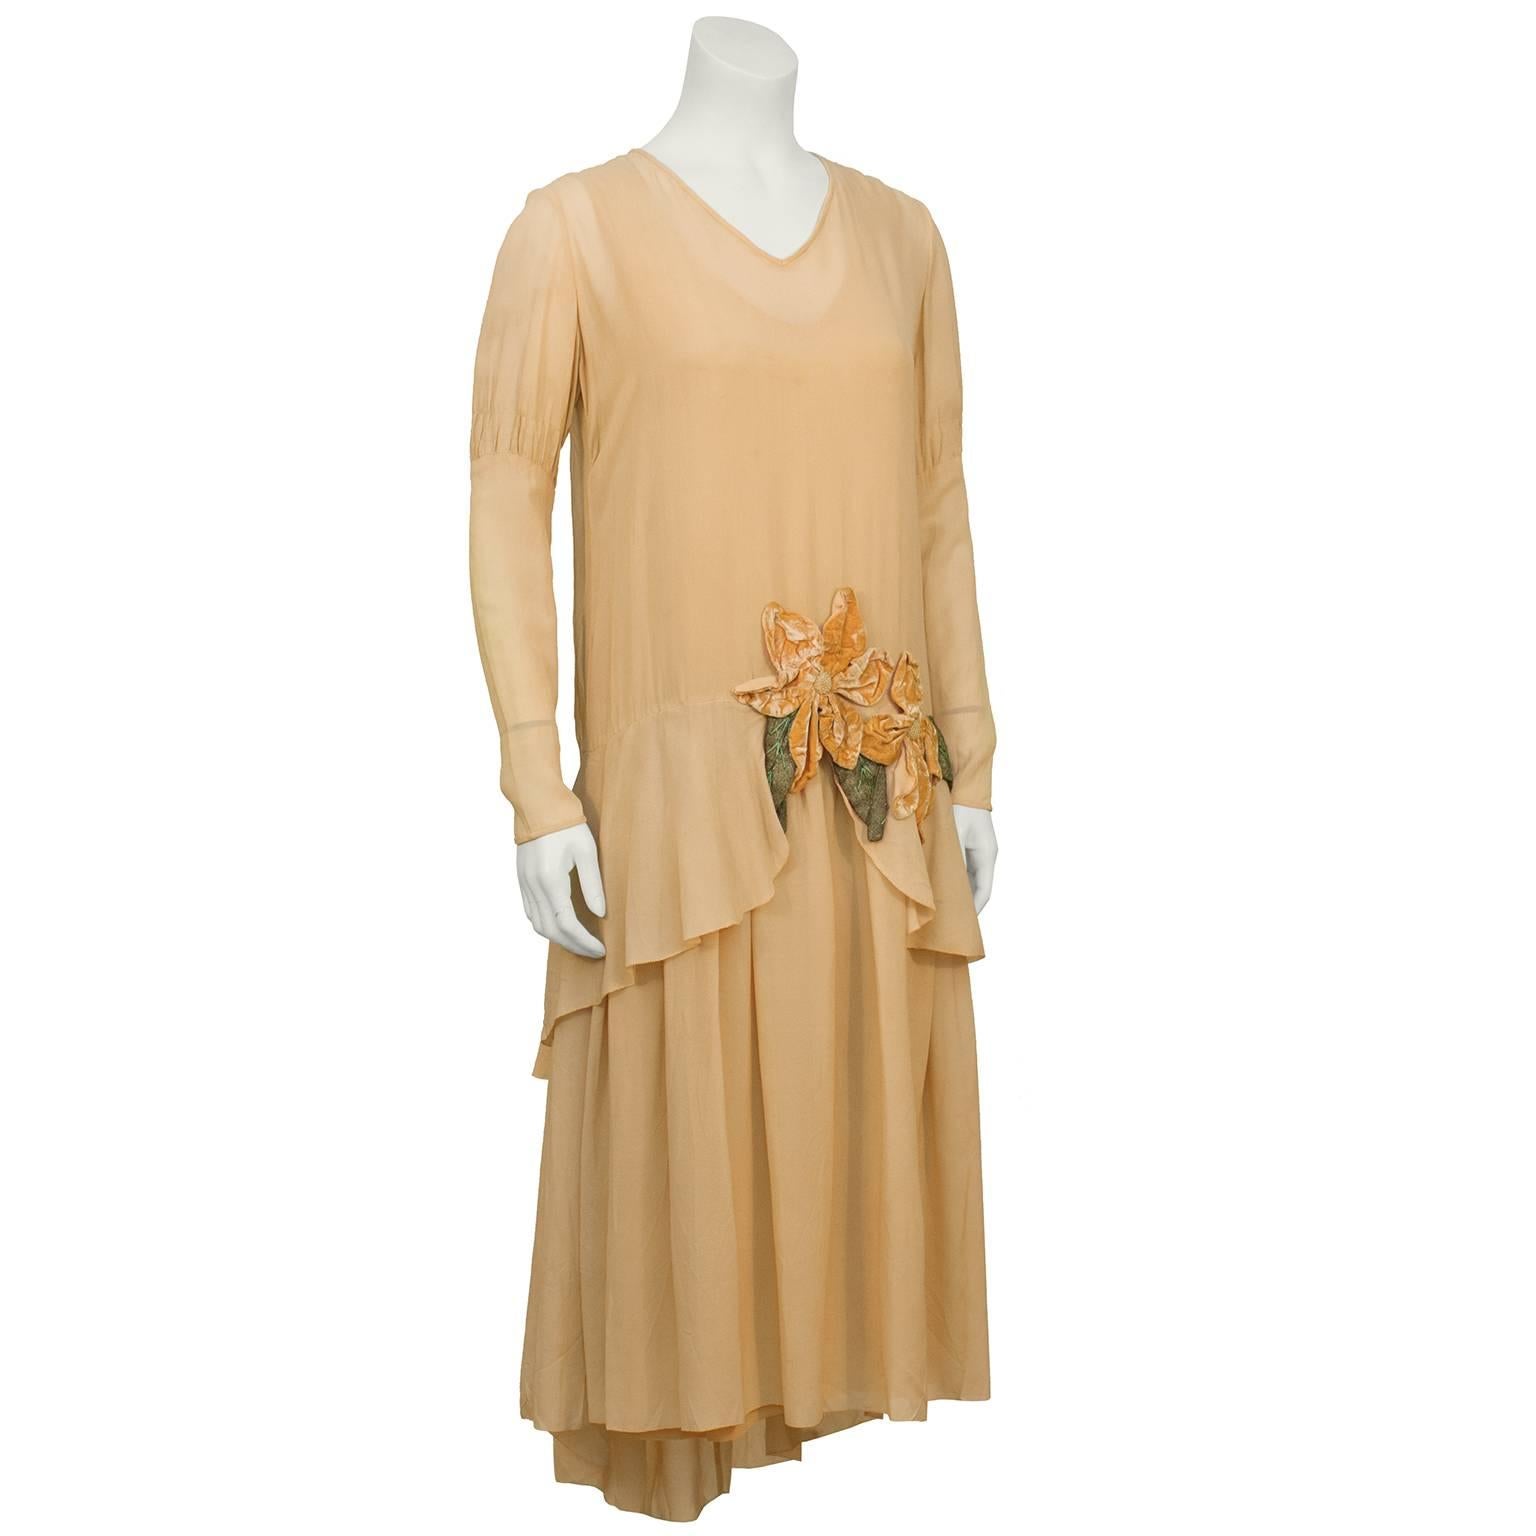 Beautiful dressmaker made 1920's peach silk chiffon and panne velvet flapper dress with matching cloche hat. Long sleeves with 3 tiers of chiffon and lace inset on the back with a velvet tie. The front has a tulip tier and velvet applique flowers.